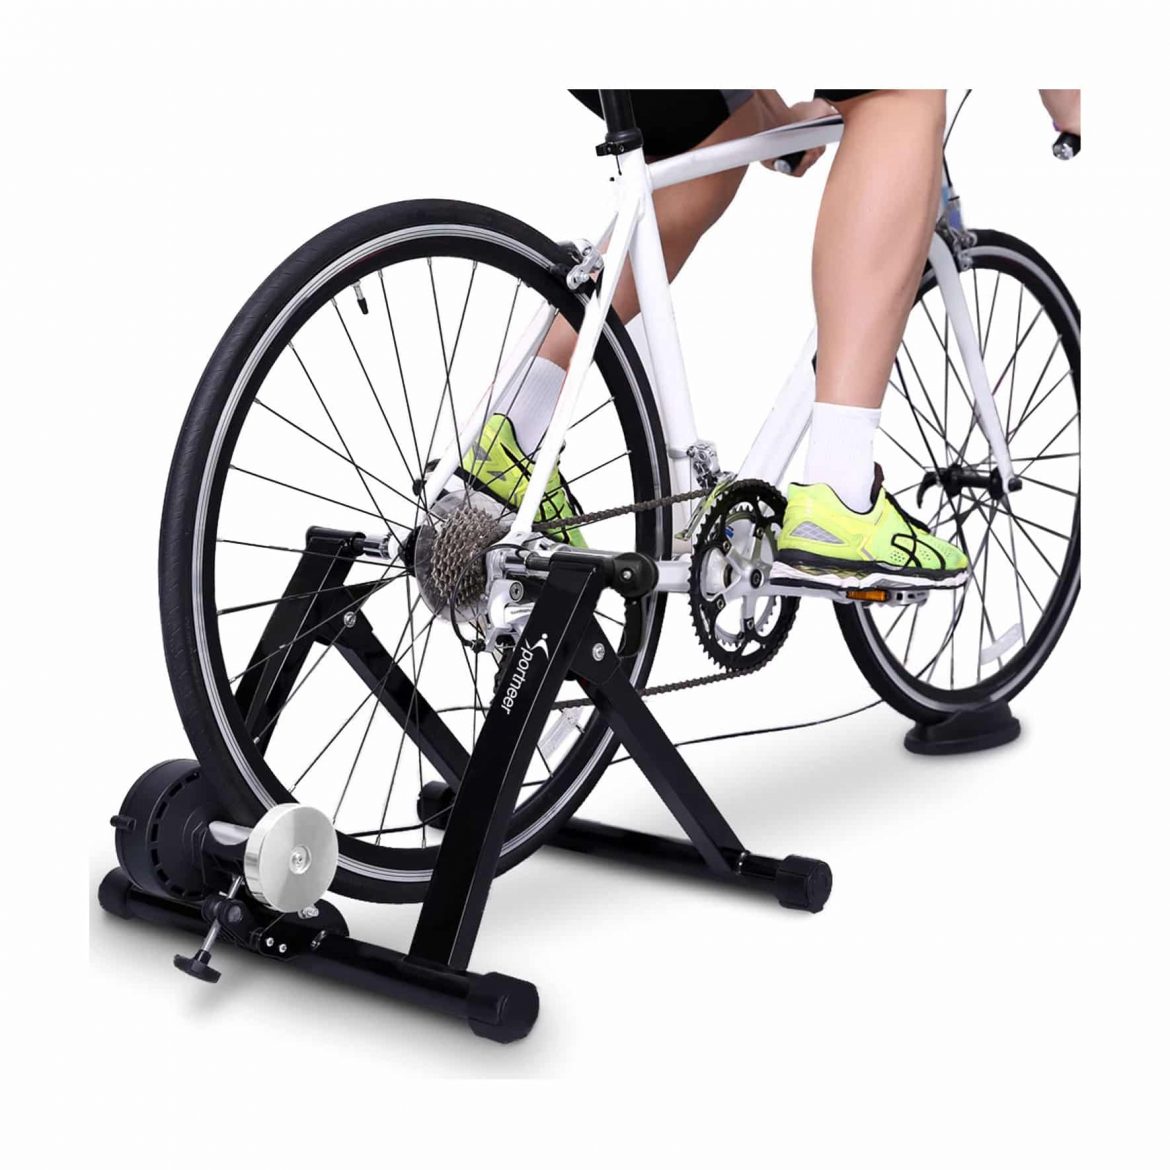 Top 10 Best Bicycle Stationary Stands in 2021 Reviews | Buyer's Guide